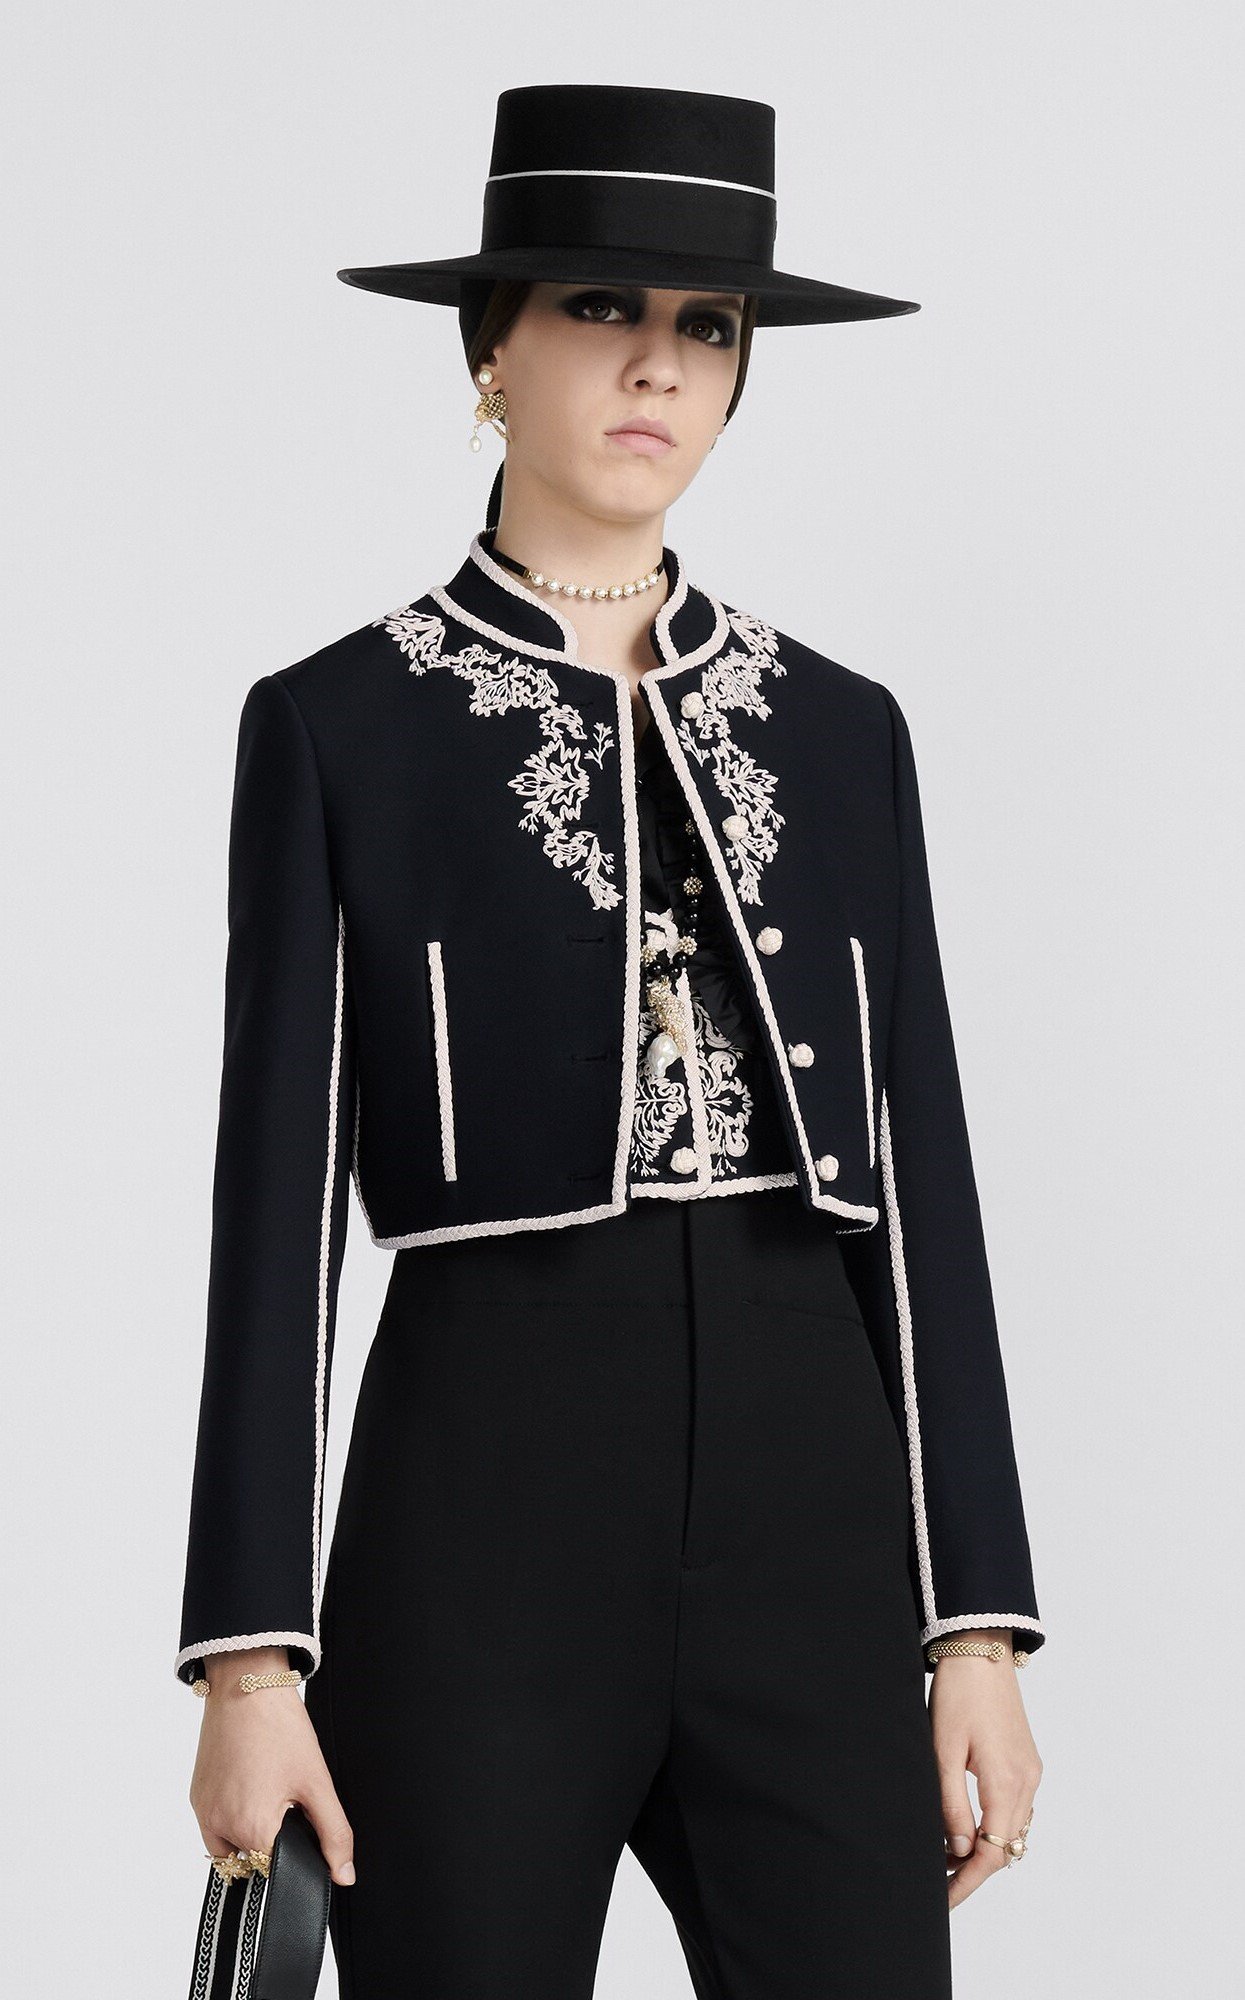 Christian Dior Embroidered Cropped Jacket in Black.jpg